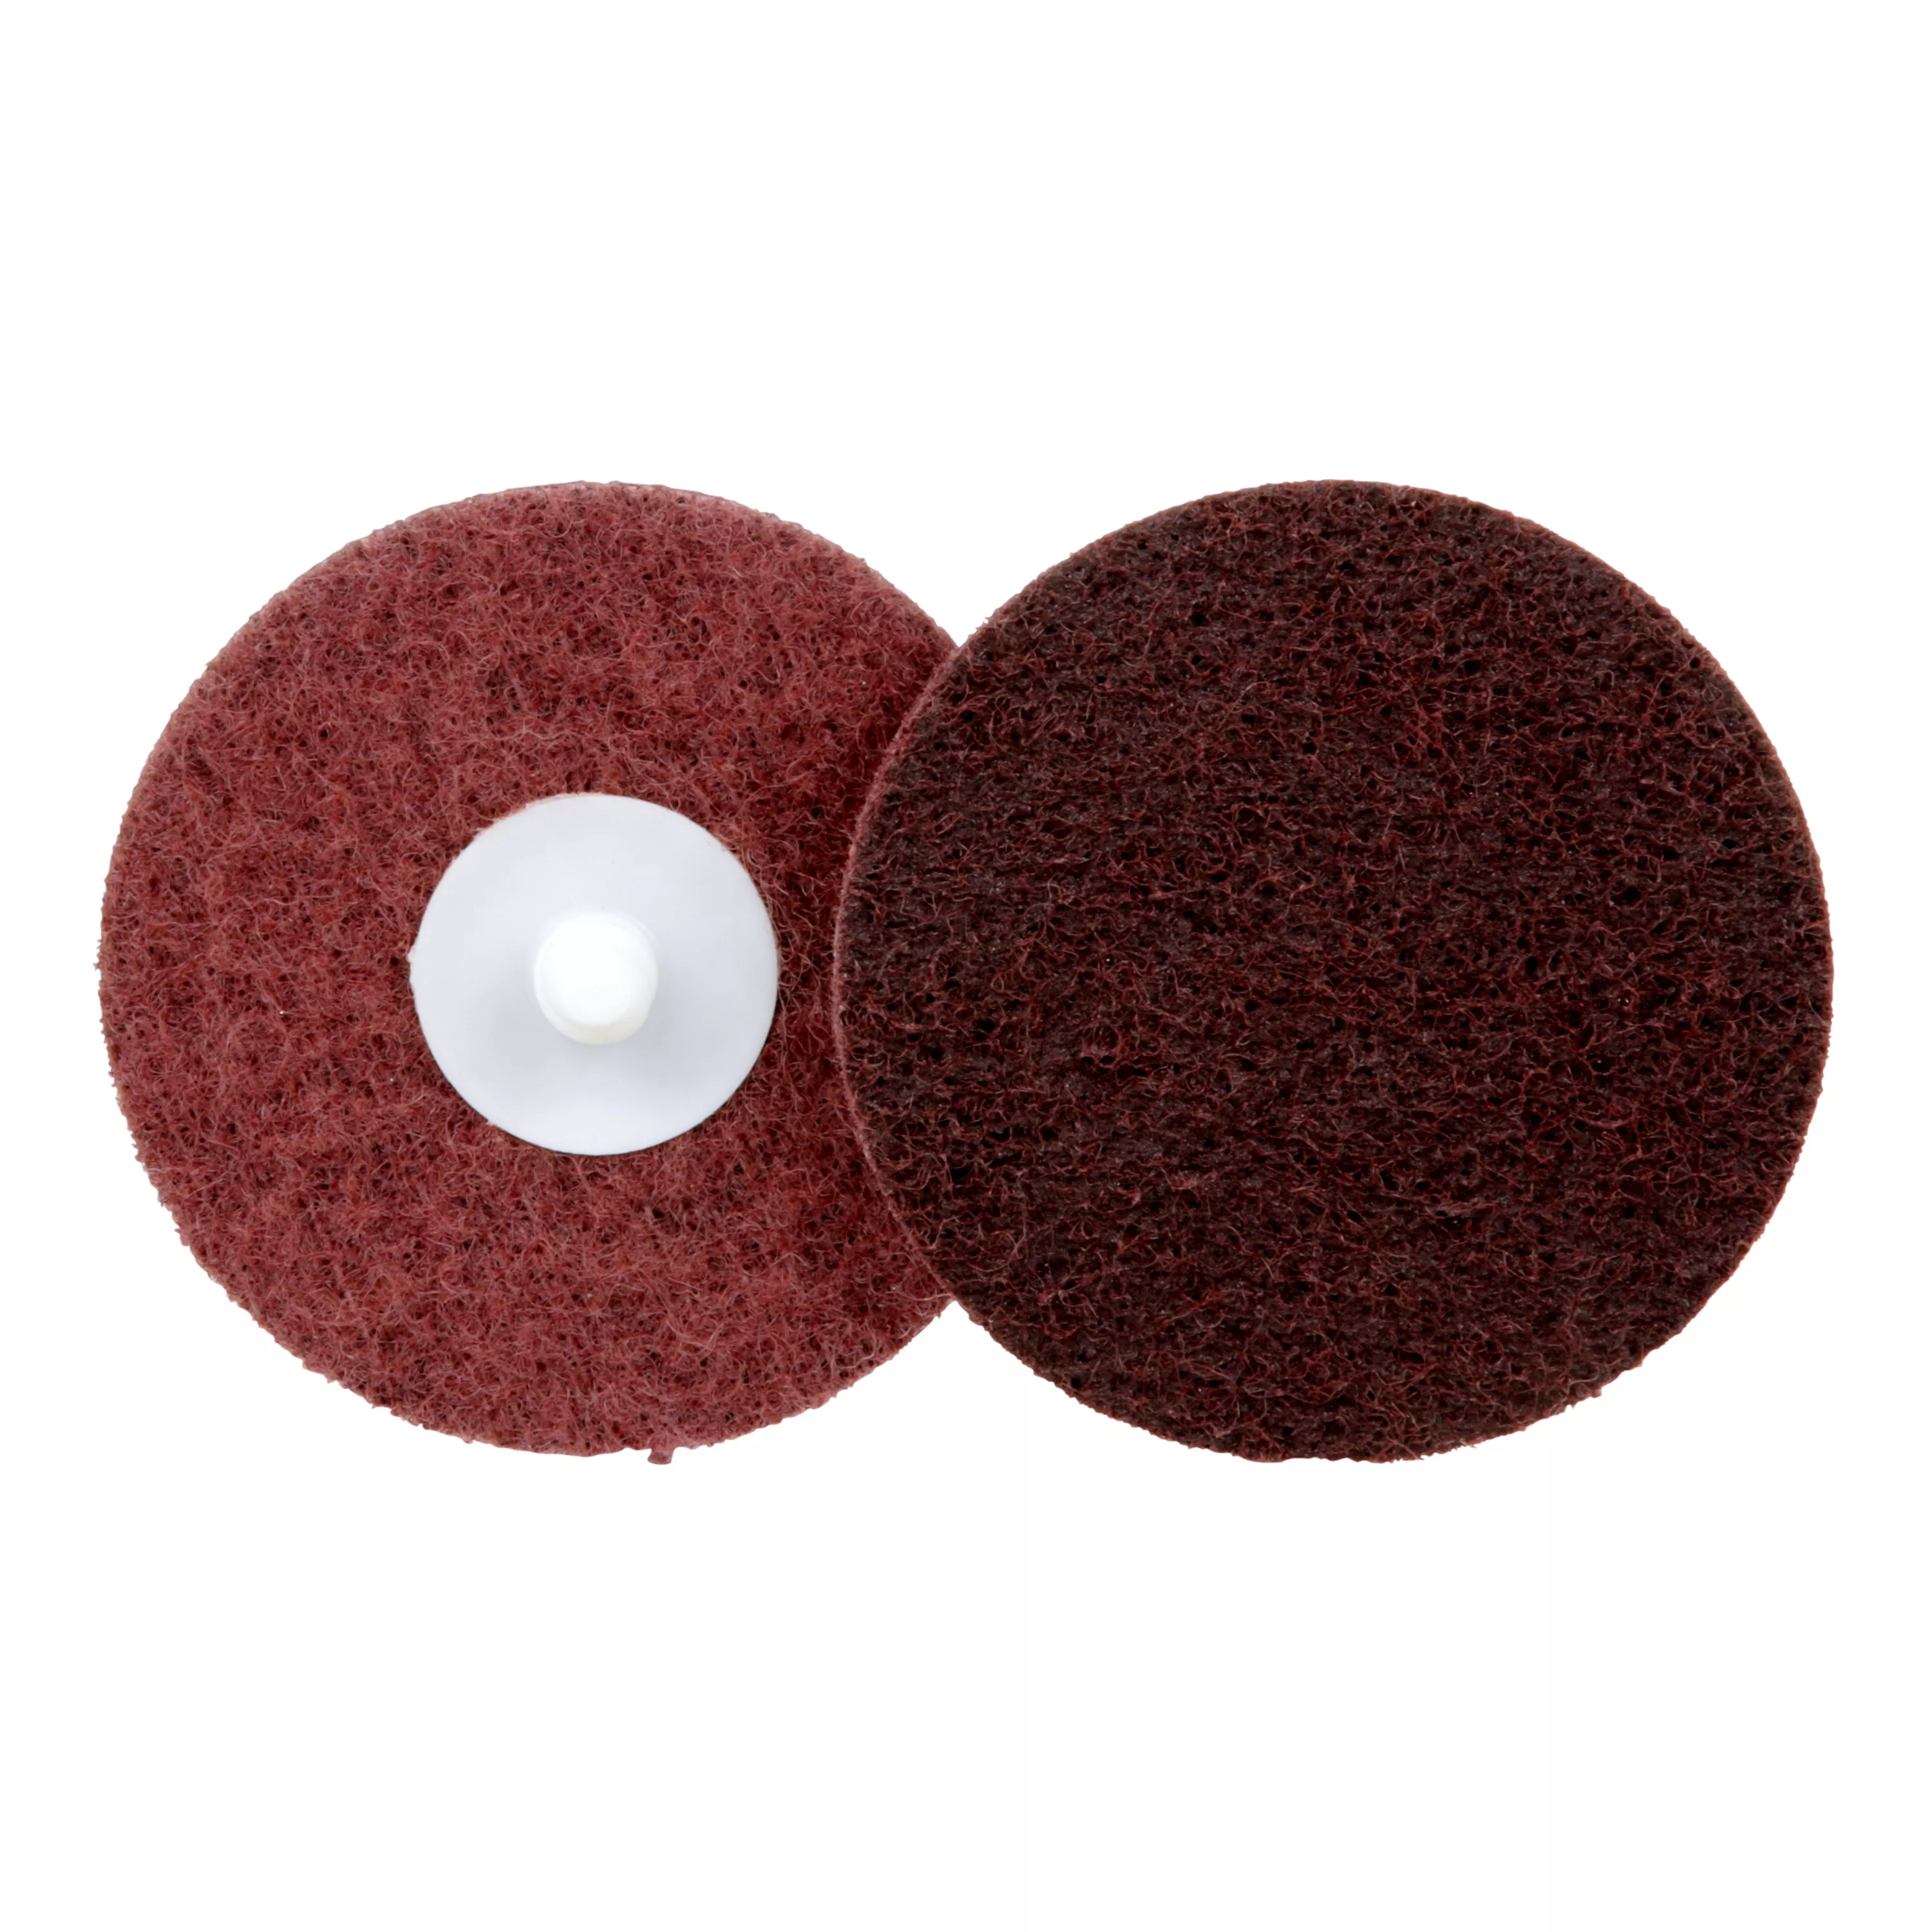 SKU 7000046878 | Standard Abrasives™ Quick Change Surface Conditioning RC Disc